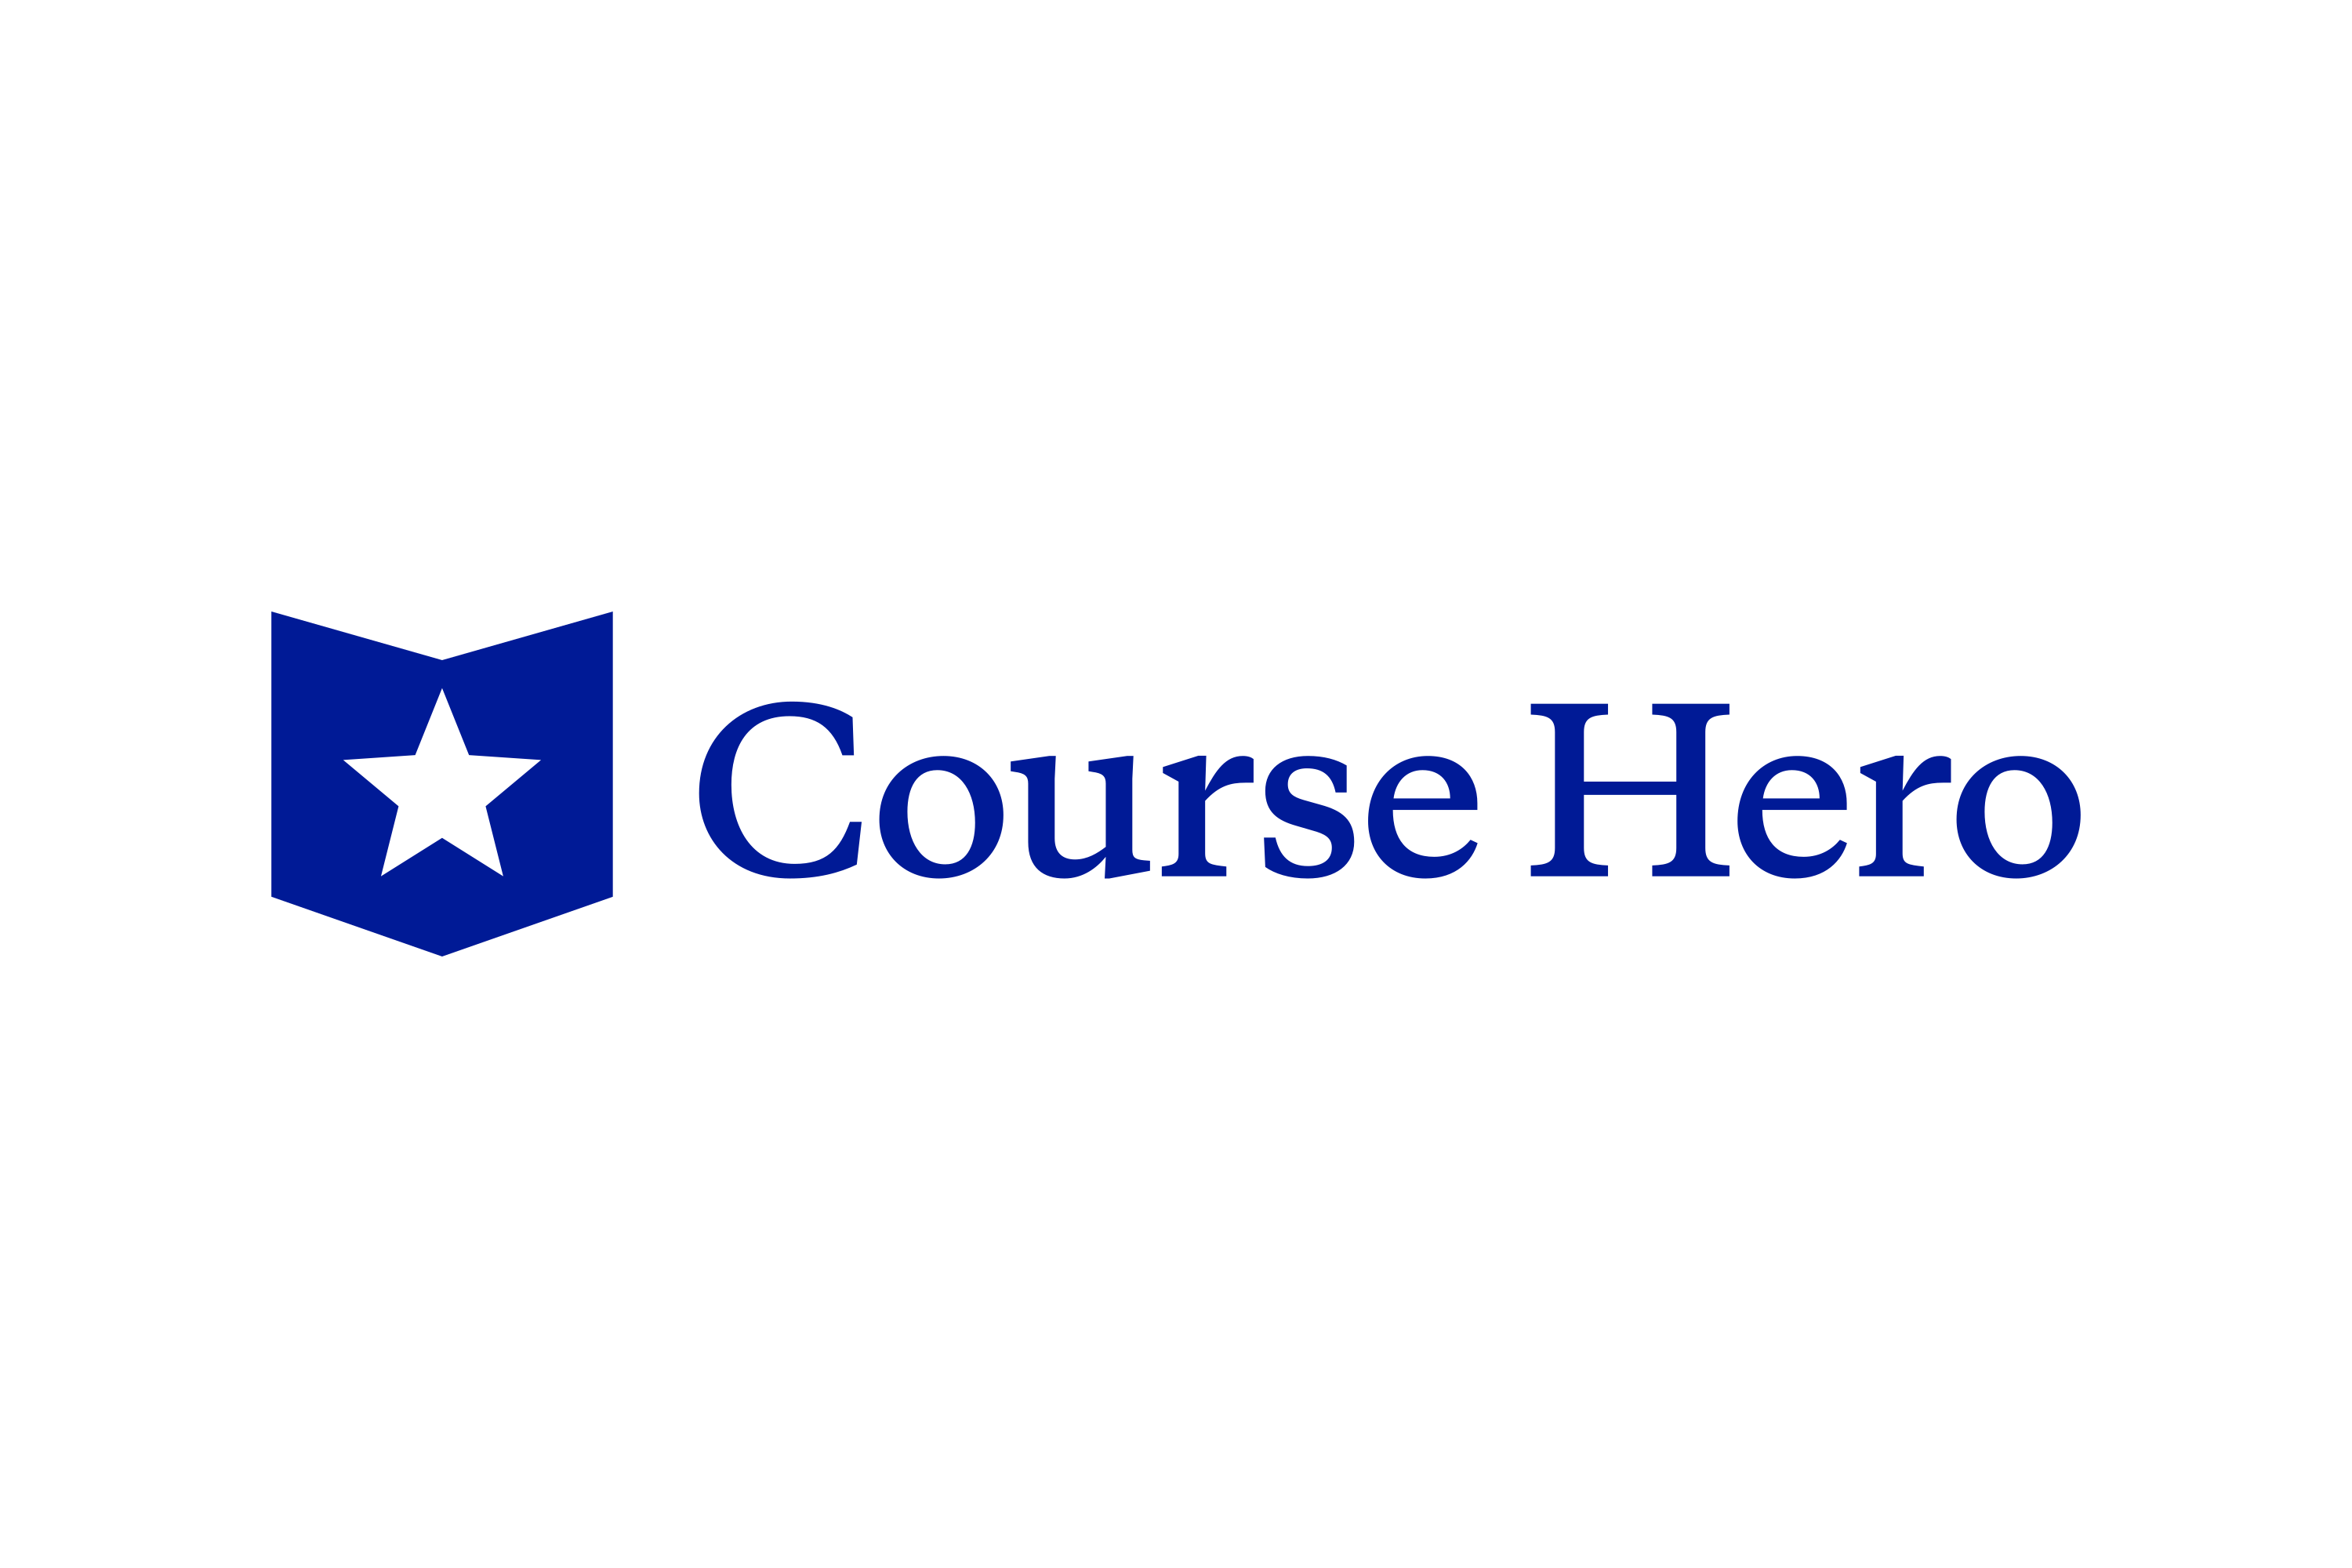 Course Hero Free Documents - wide 8